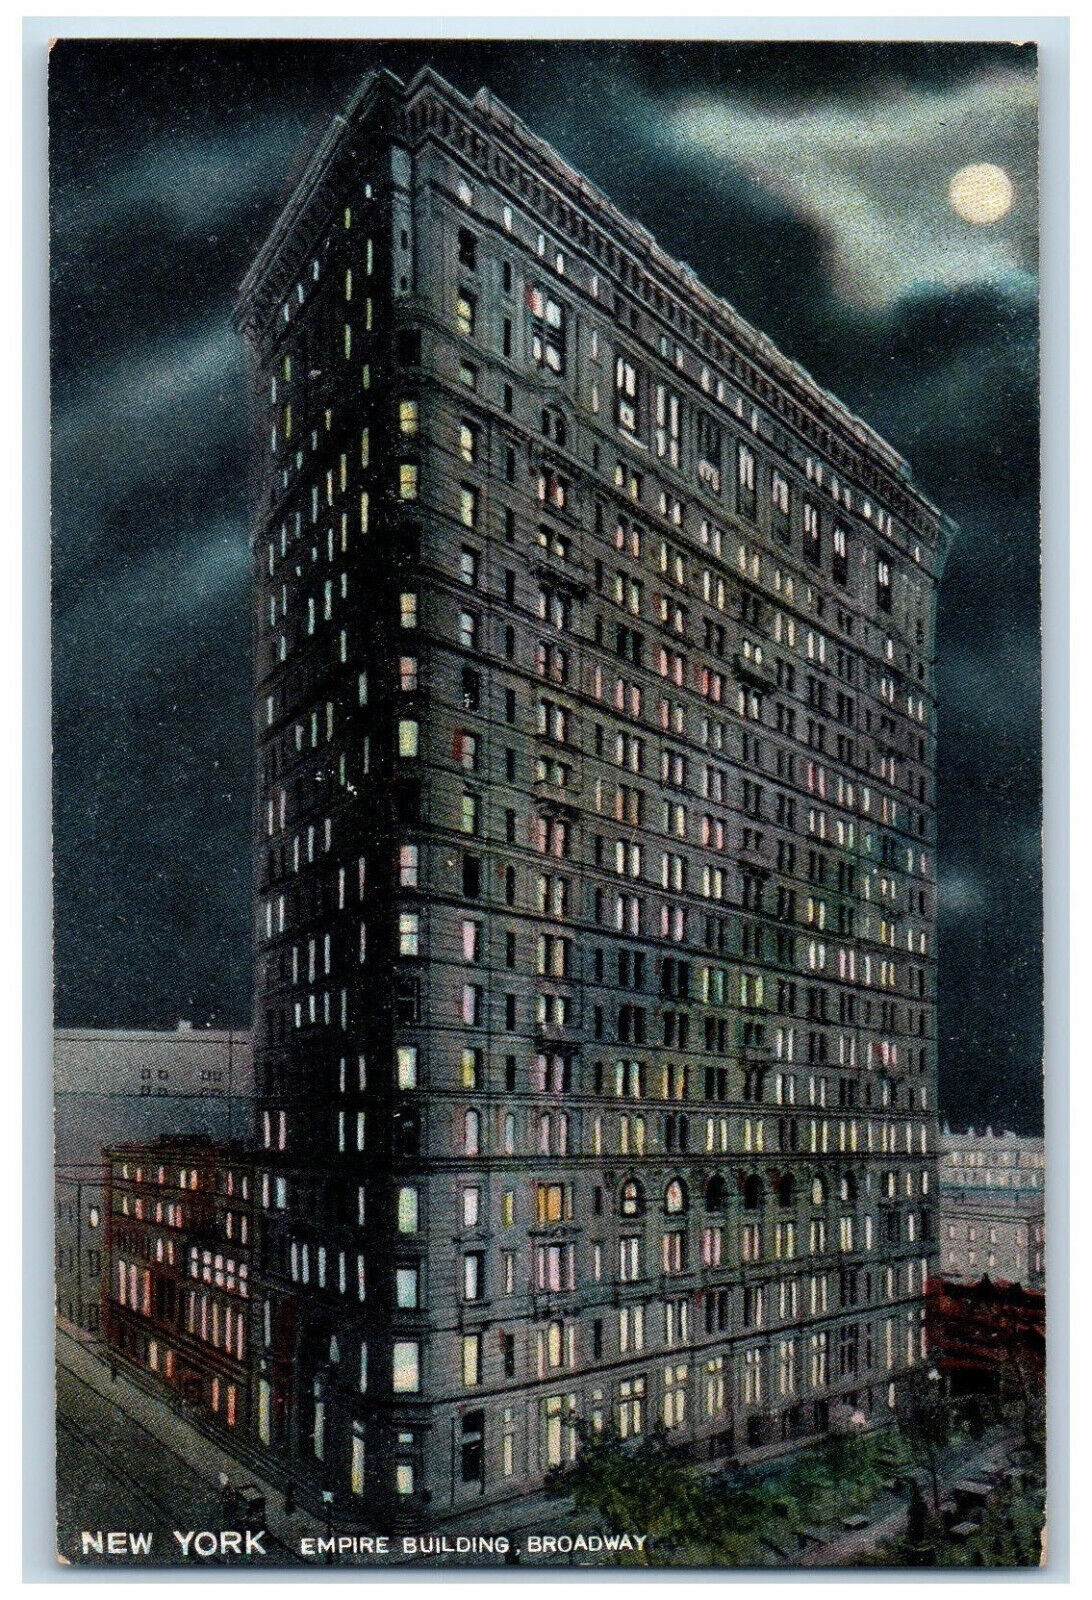 1909 Empire Building Broadway New York NY at Night Antique Posted Postcard